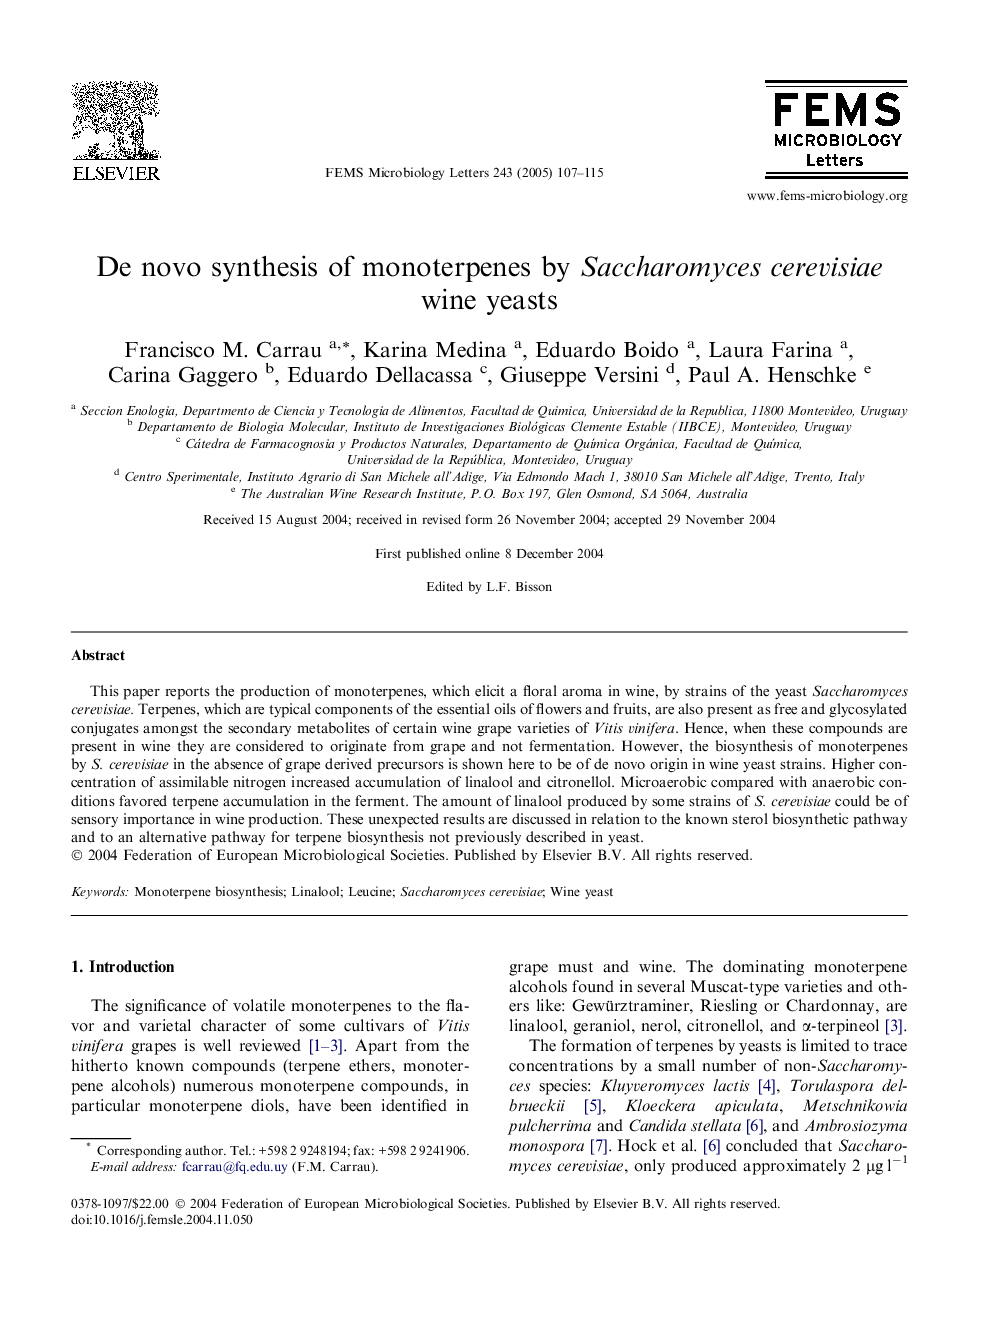 De novo synthesis of monoterpenes by Saccharomyces cerevisiae wine yeasts